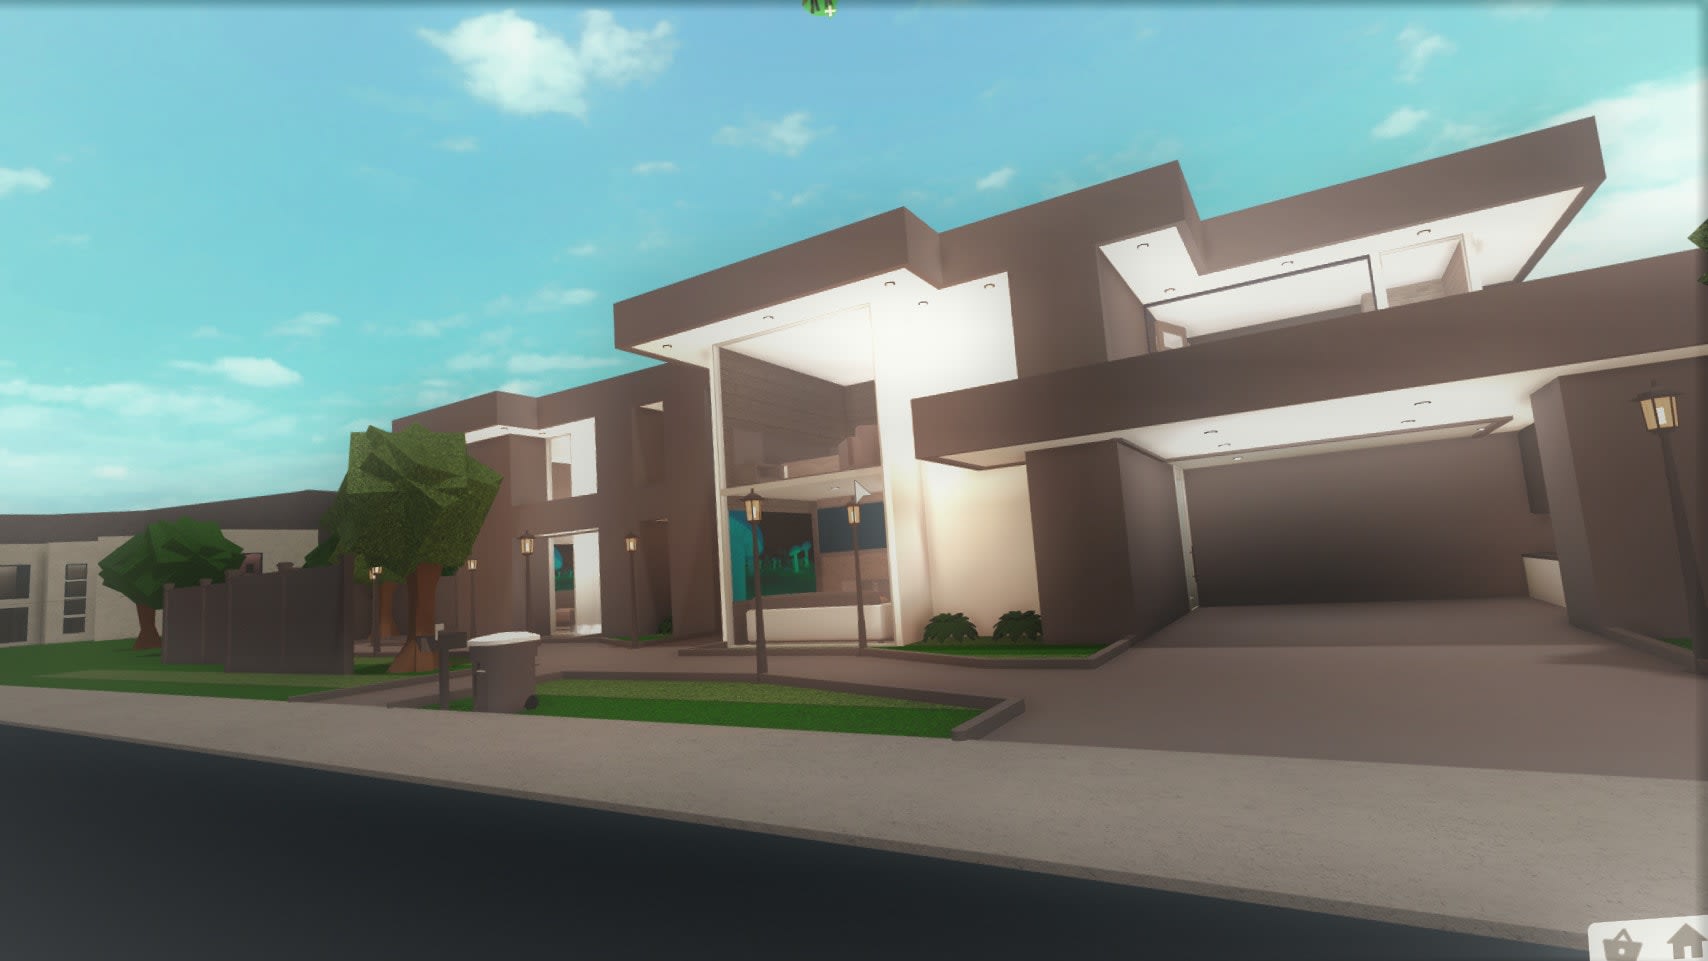 Build You A Roblox Bloxburg House For Cheap By Baggins125 Fiverr - roblox bloxburg house cheap